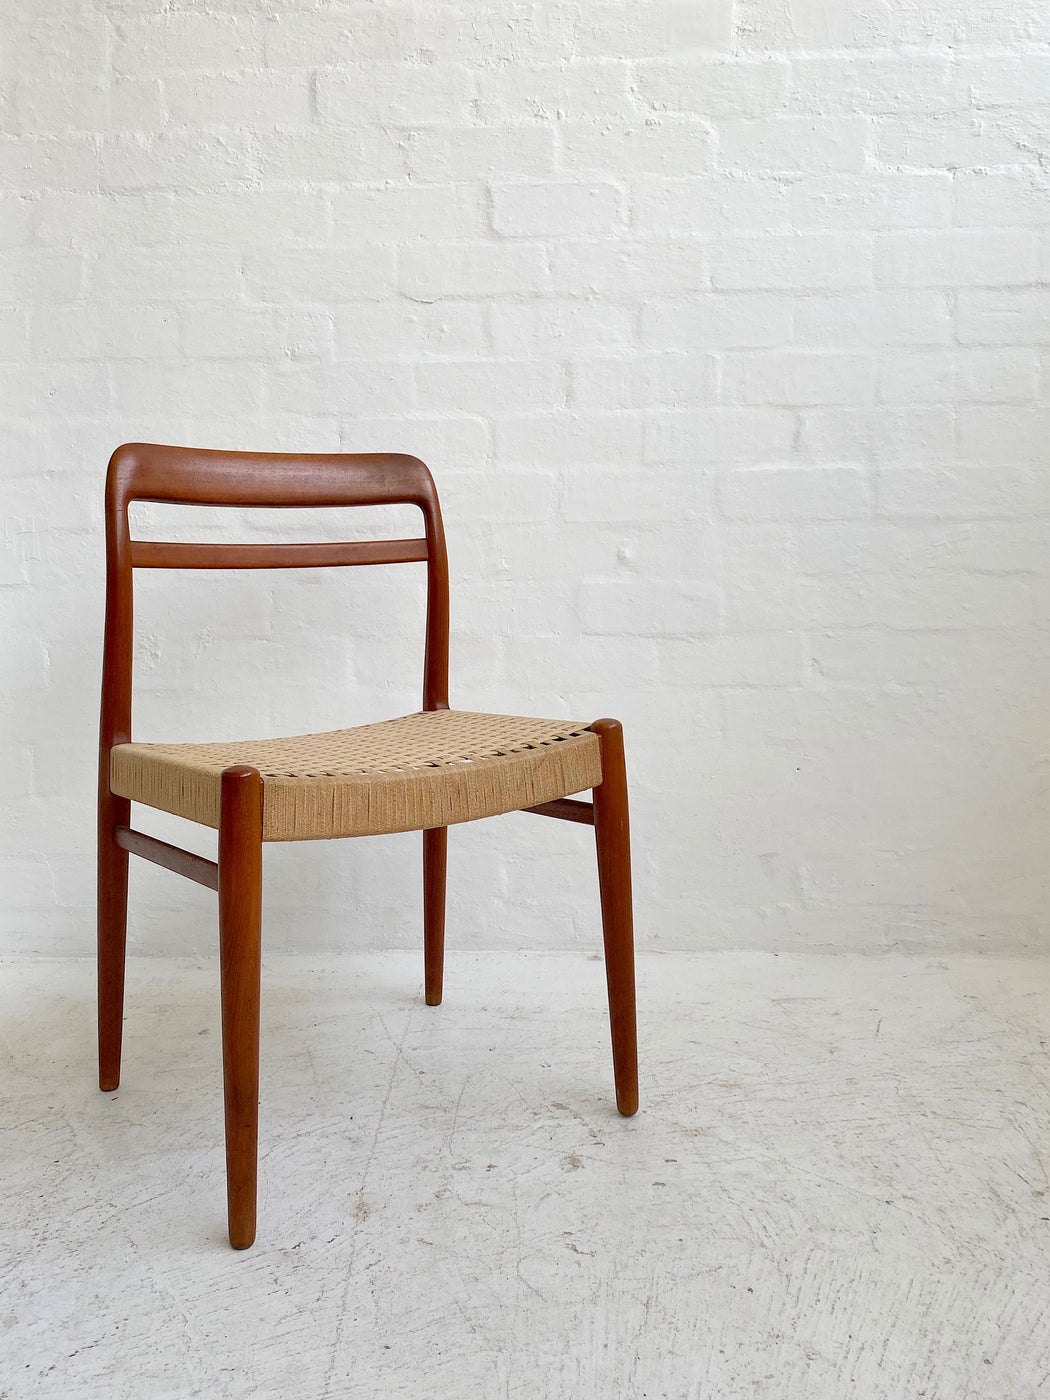 Alf Aarseth ‘Model #145’ Dining Chairs